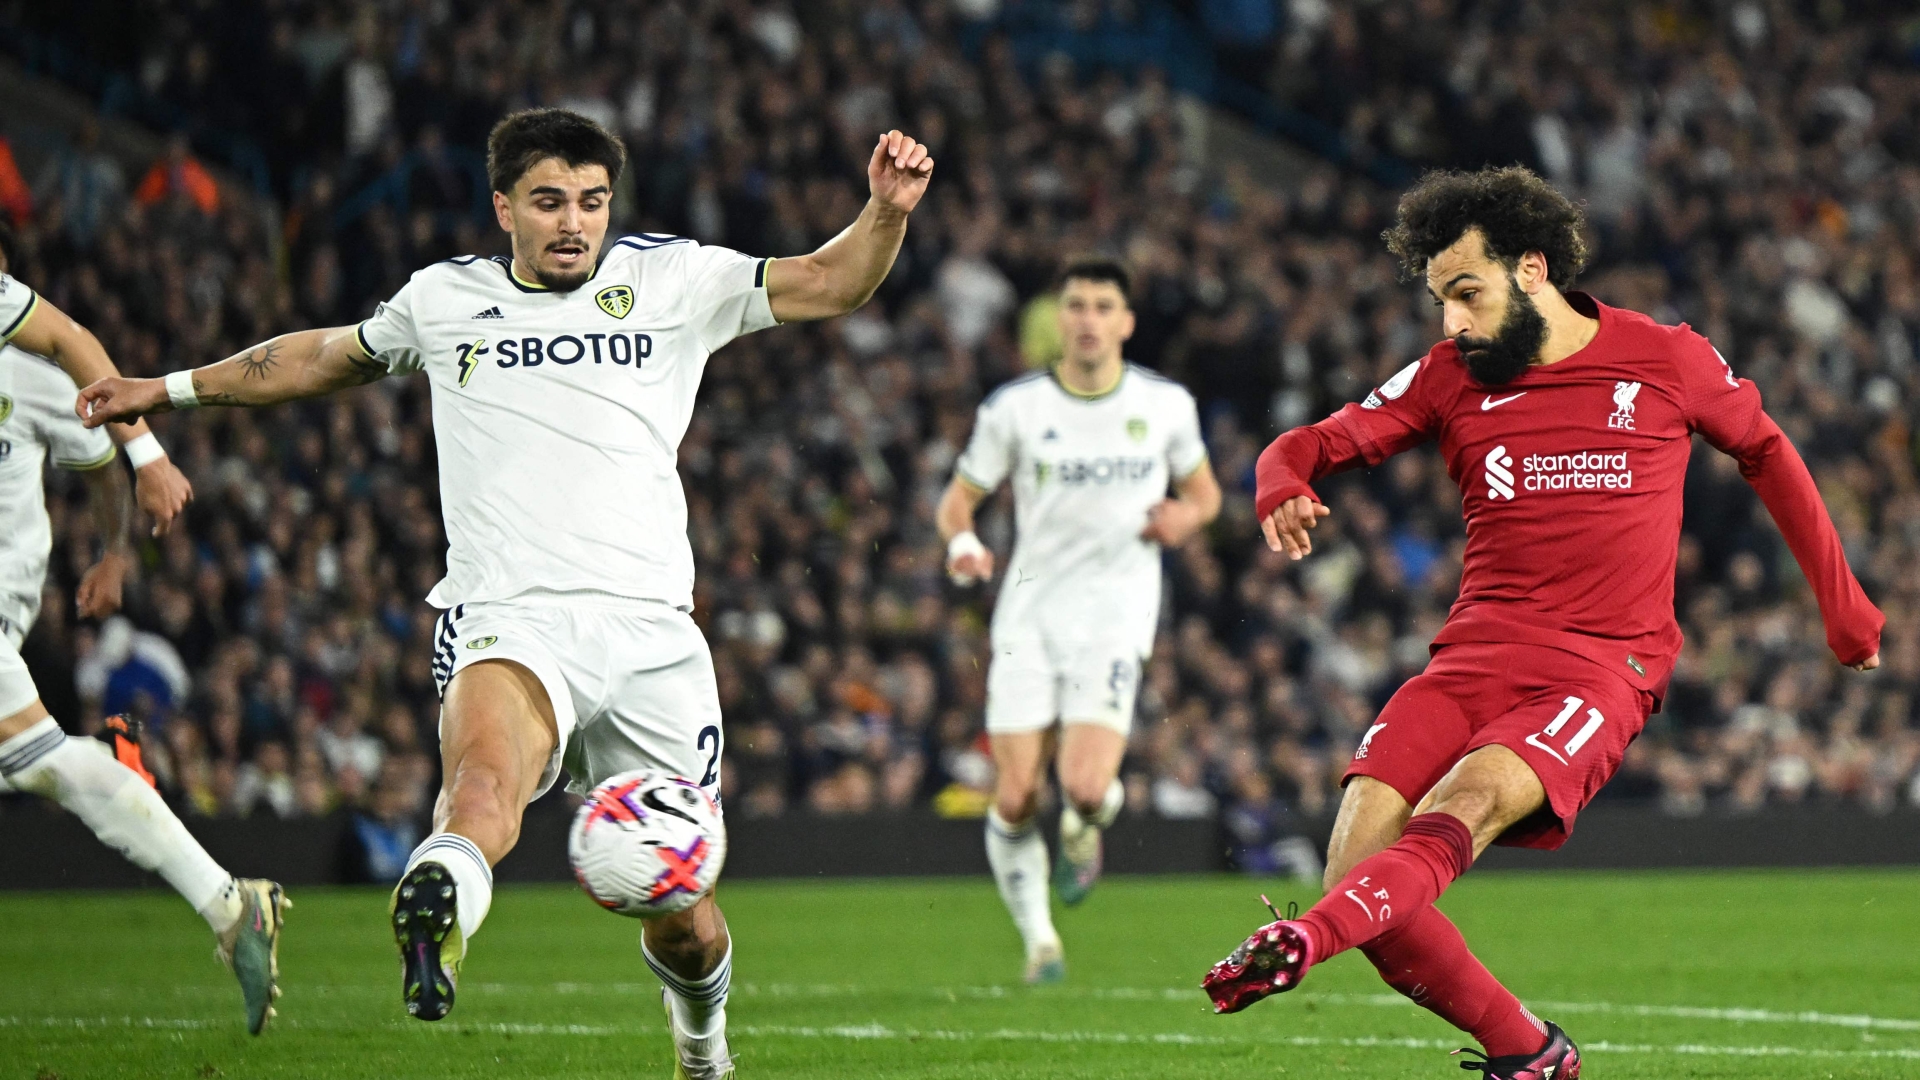 Mohamed Salah overtakes Liverpool legend Robbie Fowler to make Premier League history against Leeds